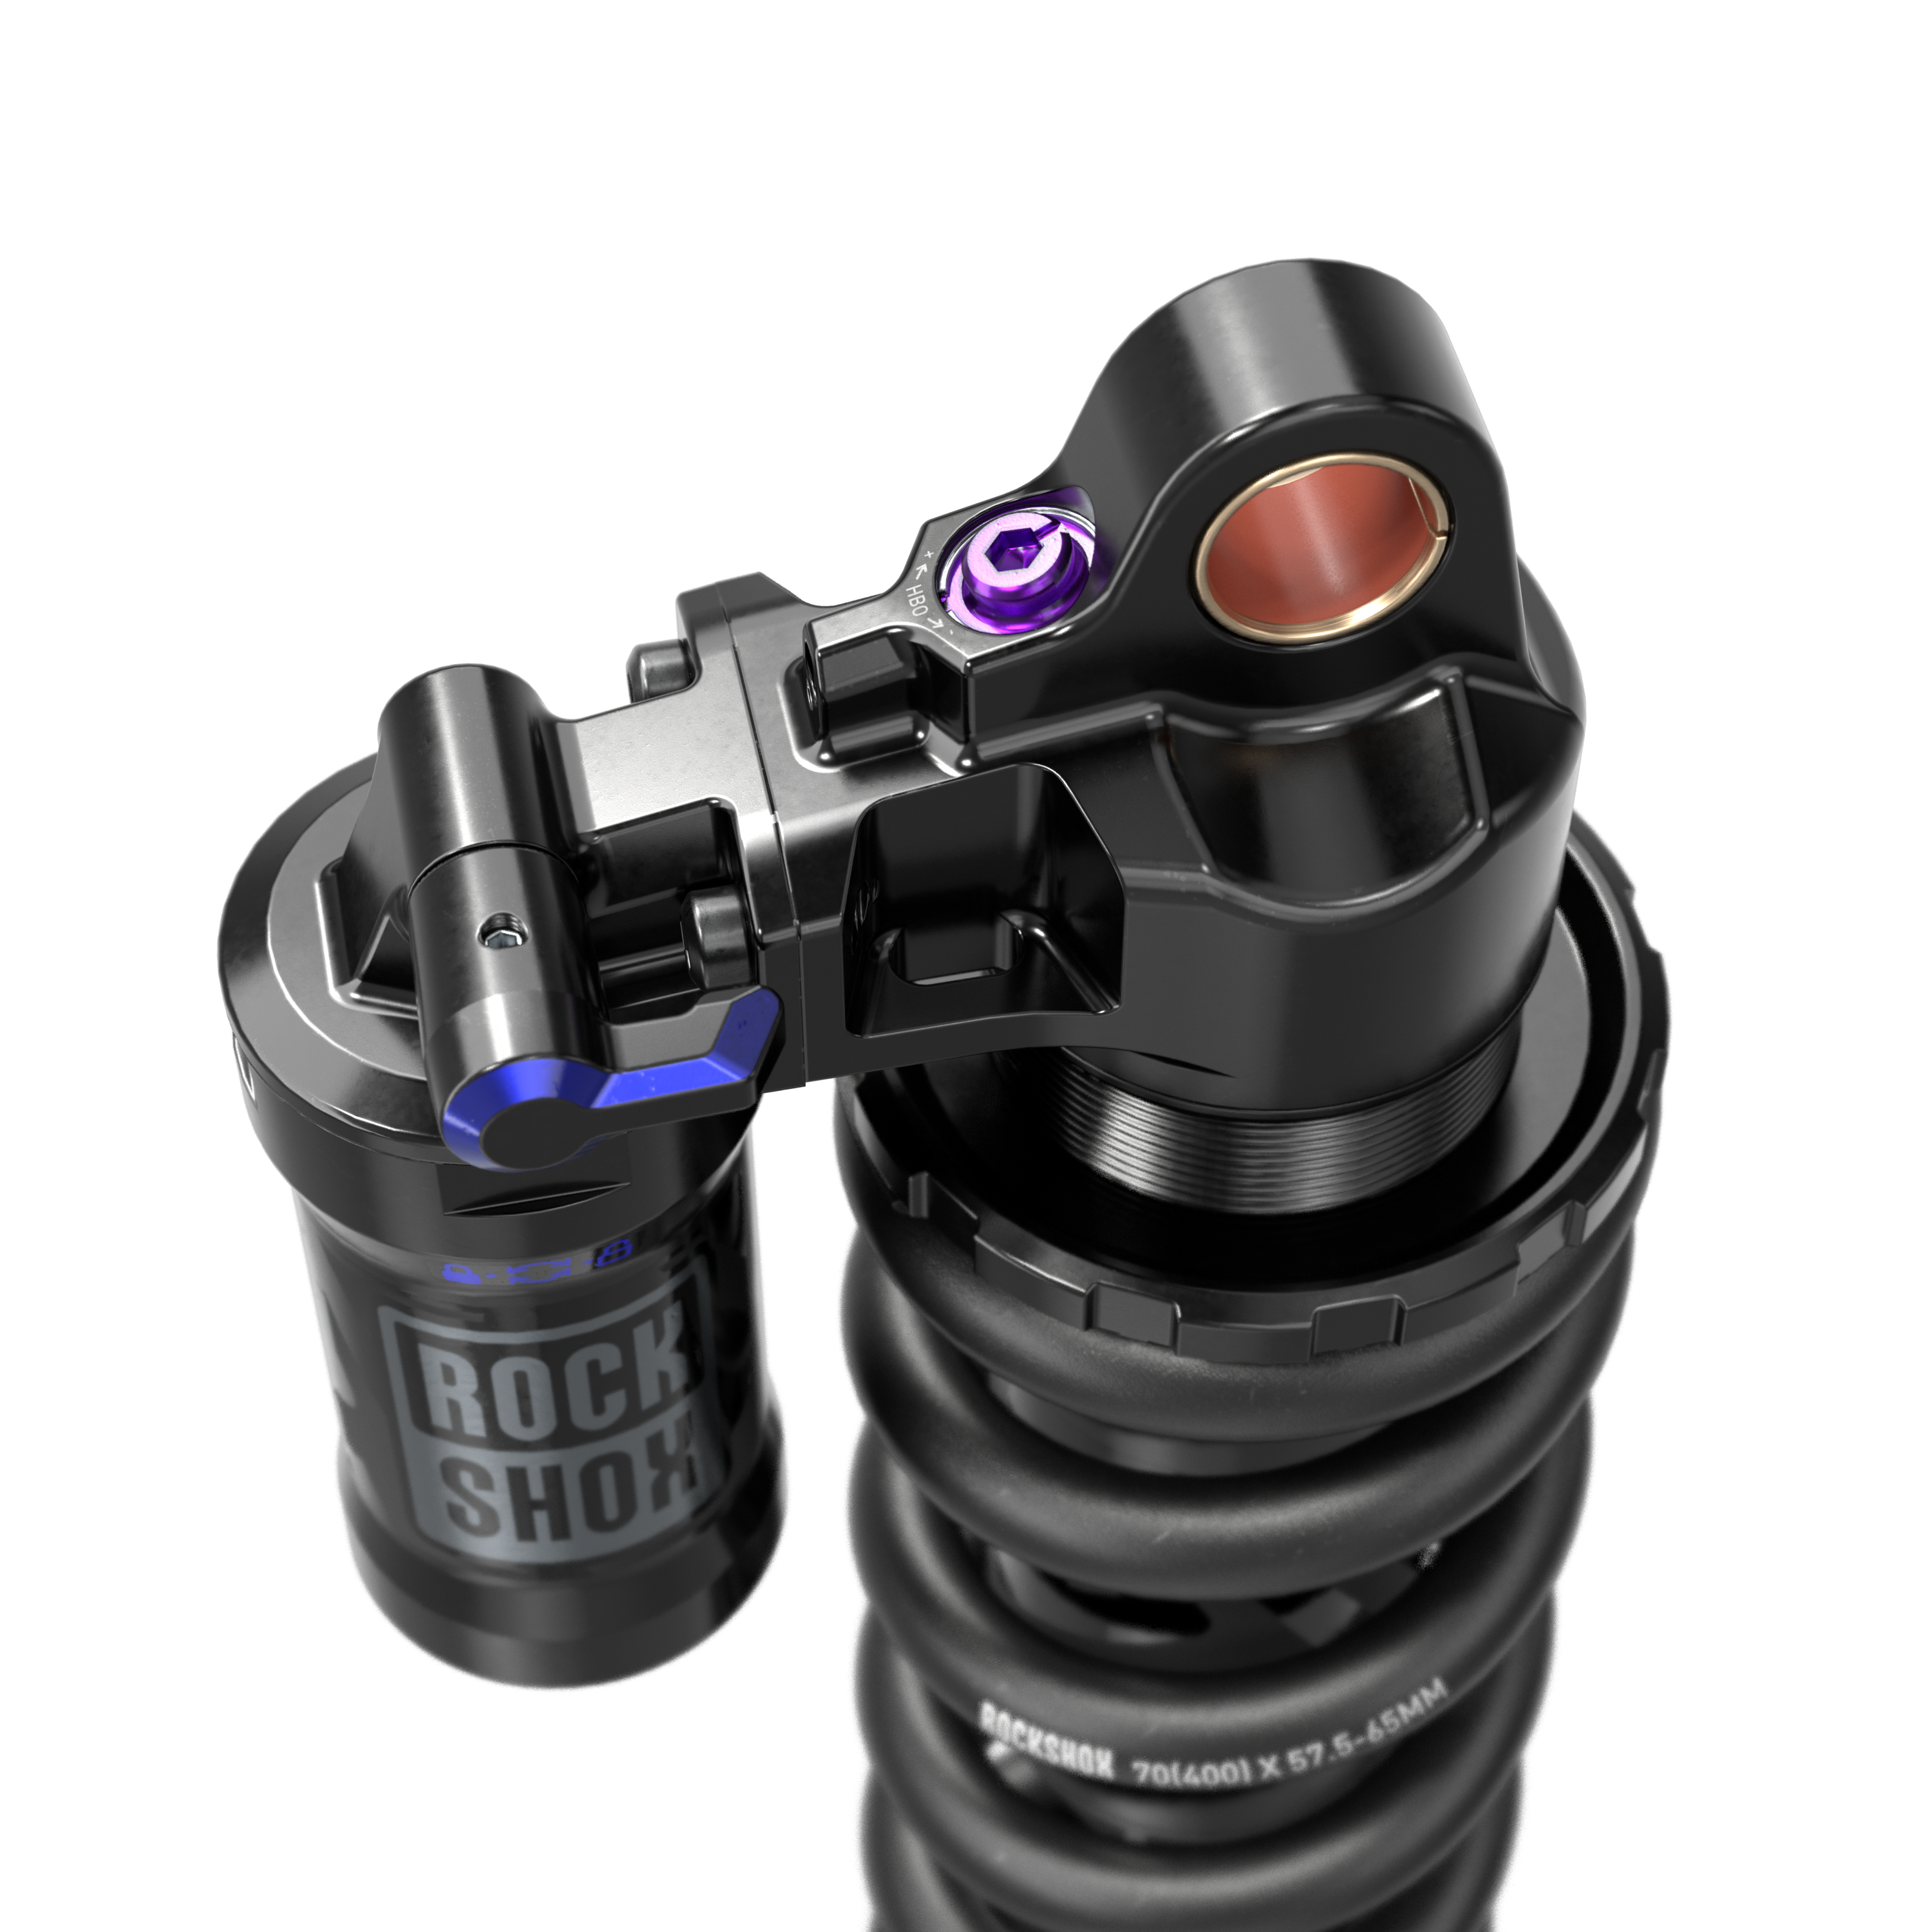 Hydraulic bottom out is an option for 2023 RockShox shocks. This feature is adjustable via a purple clicker on coil-spring shocks.